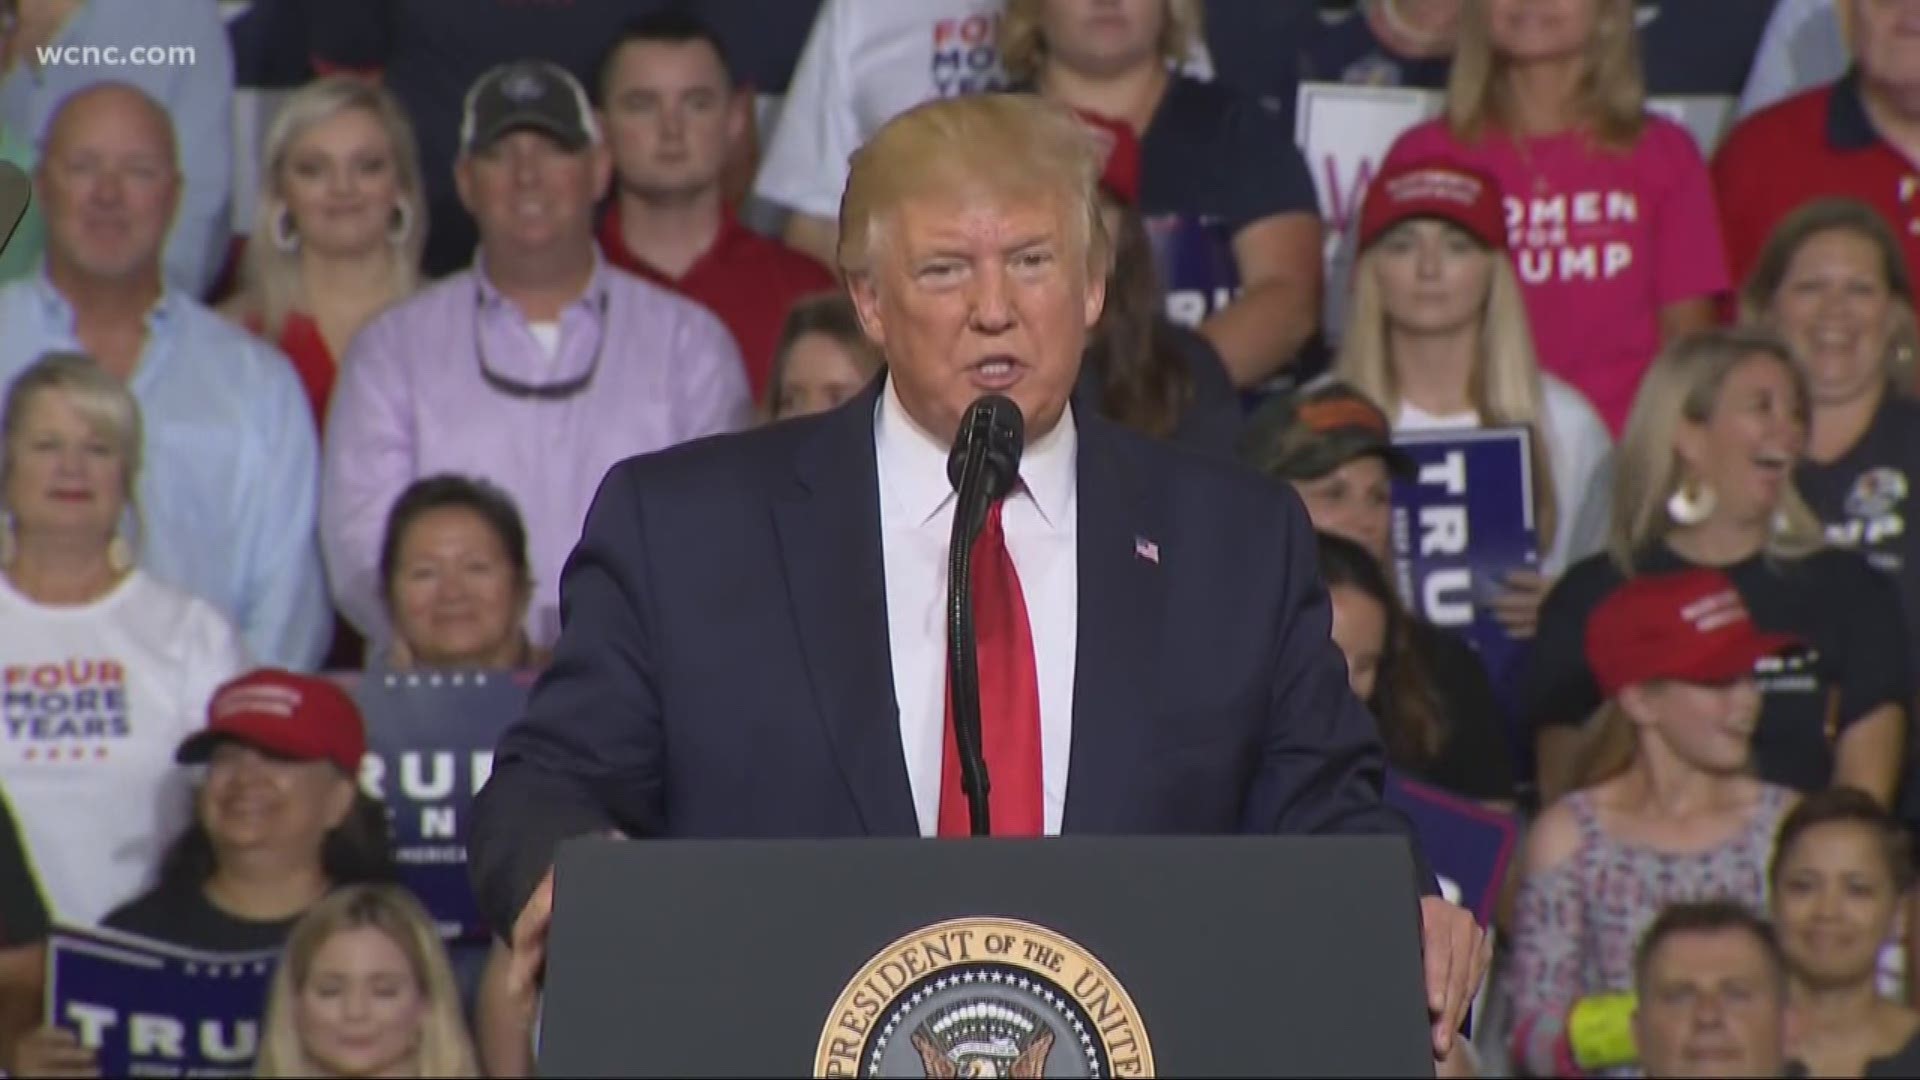 "I think in some cases they hate our country," Trump said to the crowd in North Carolina, a swing state he won in 2016 and wants to win again next year.